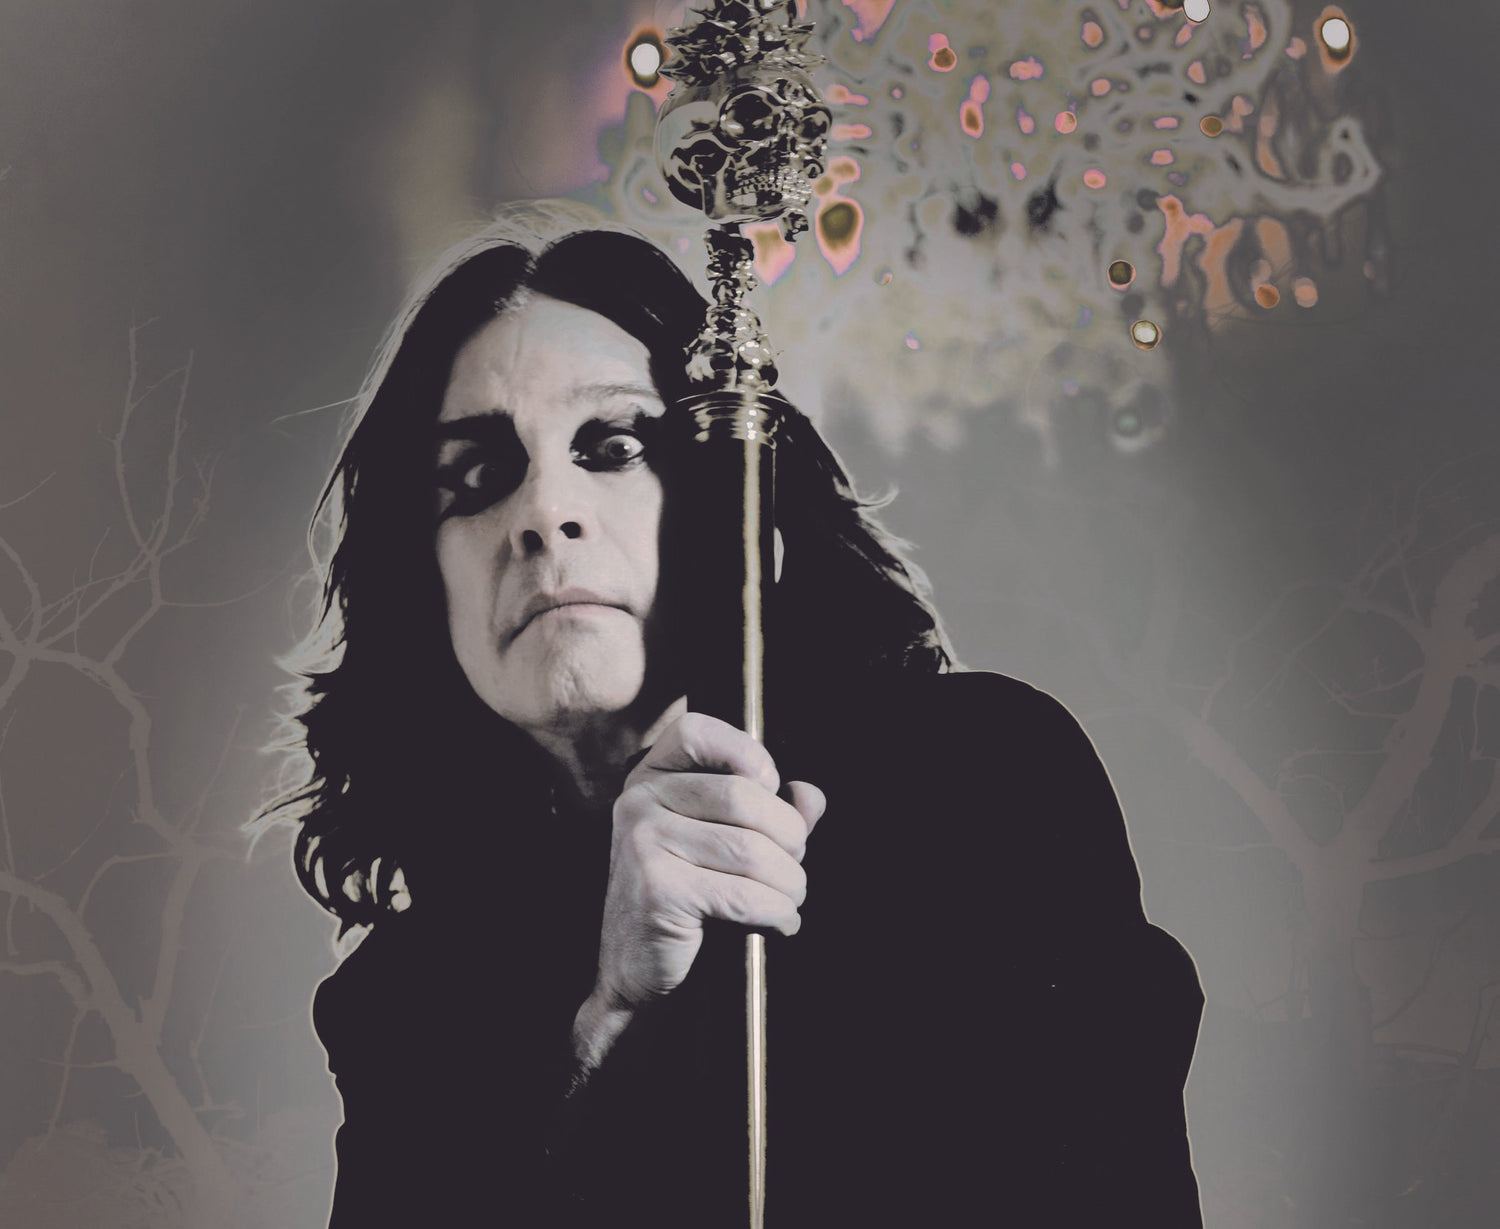 Preview: The Nine Lives of Ozzy Osbourne